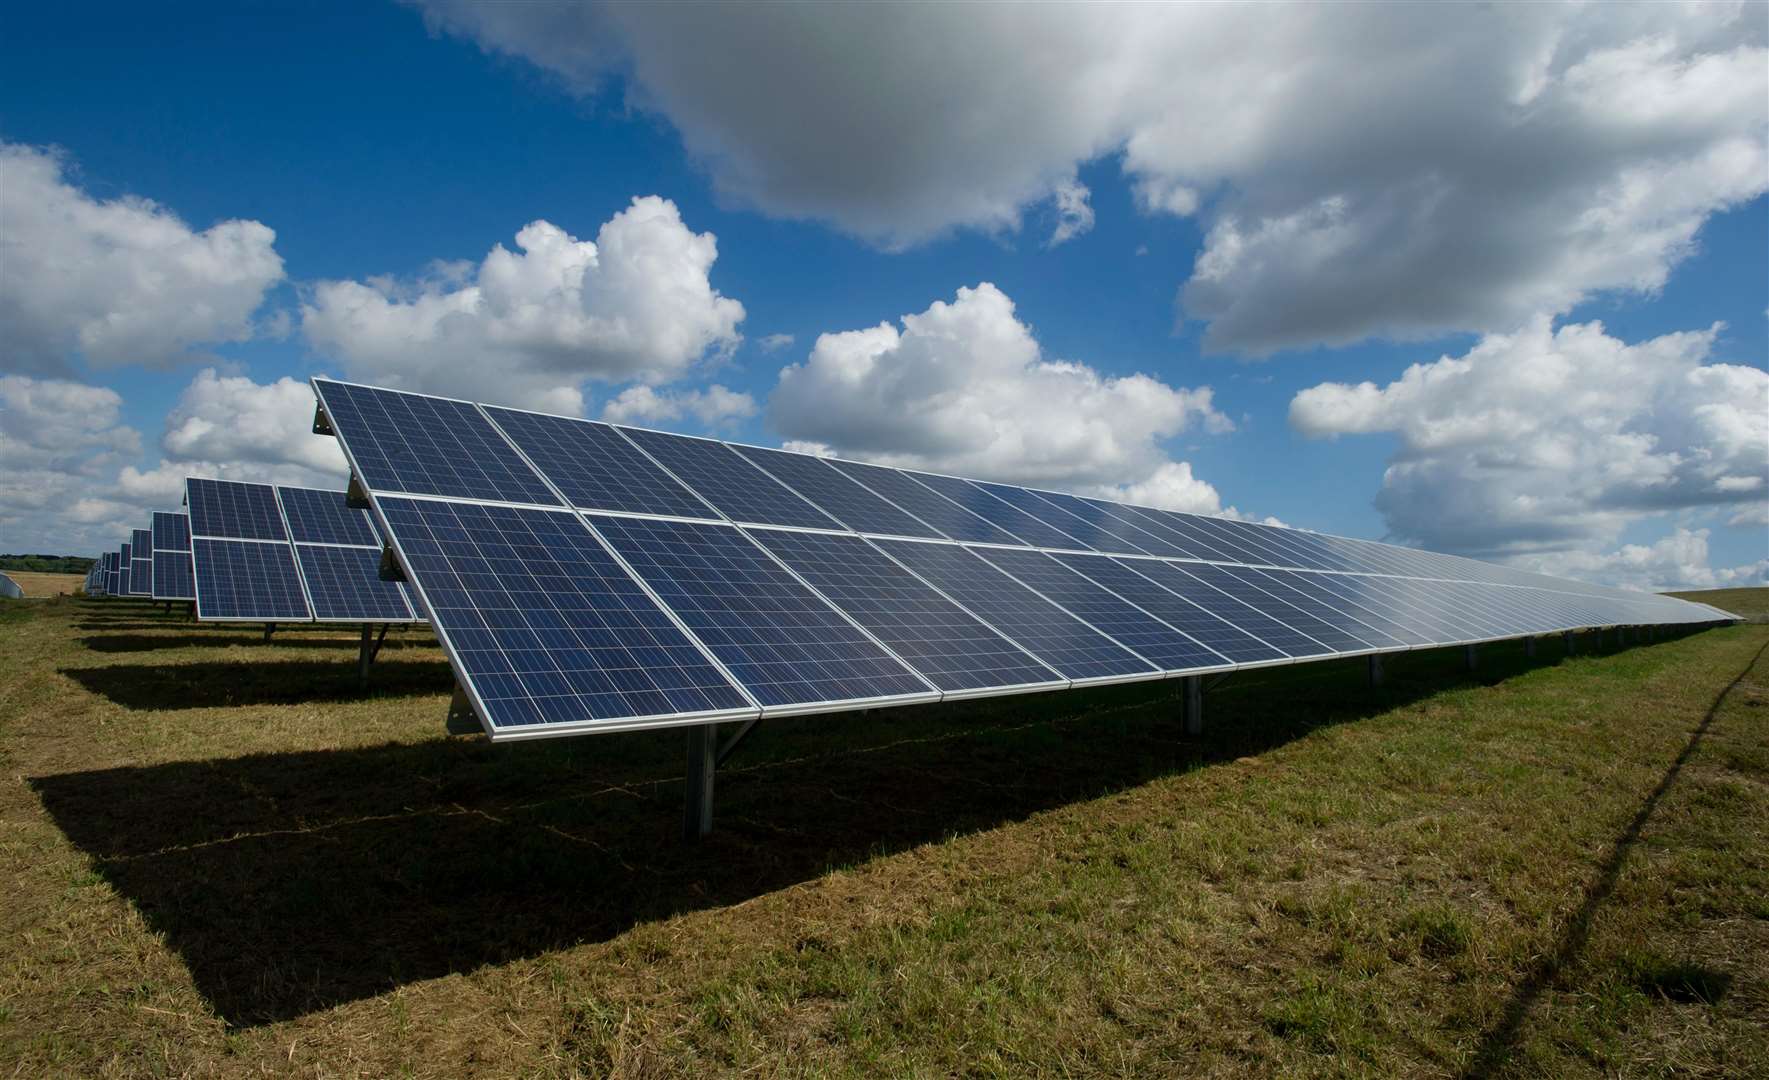 There are plans for a number of extensive solar farms in the countryside